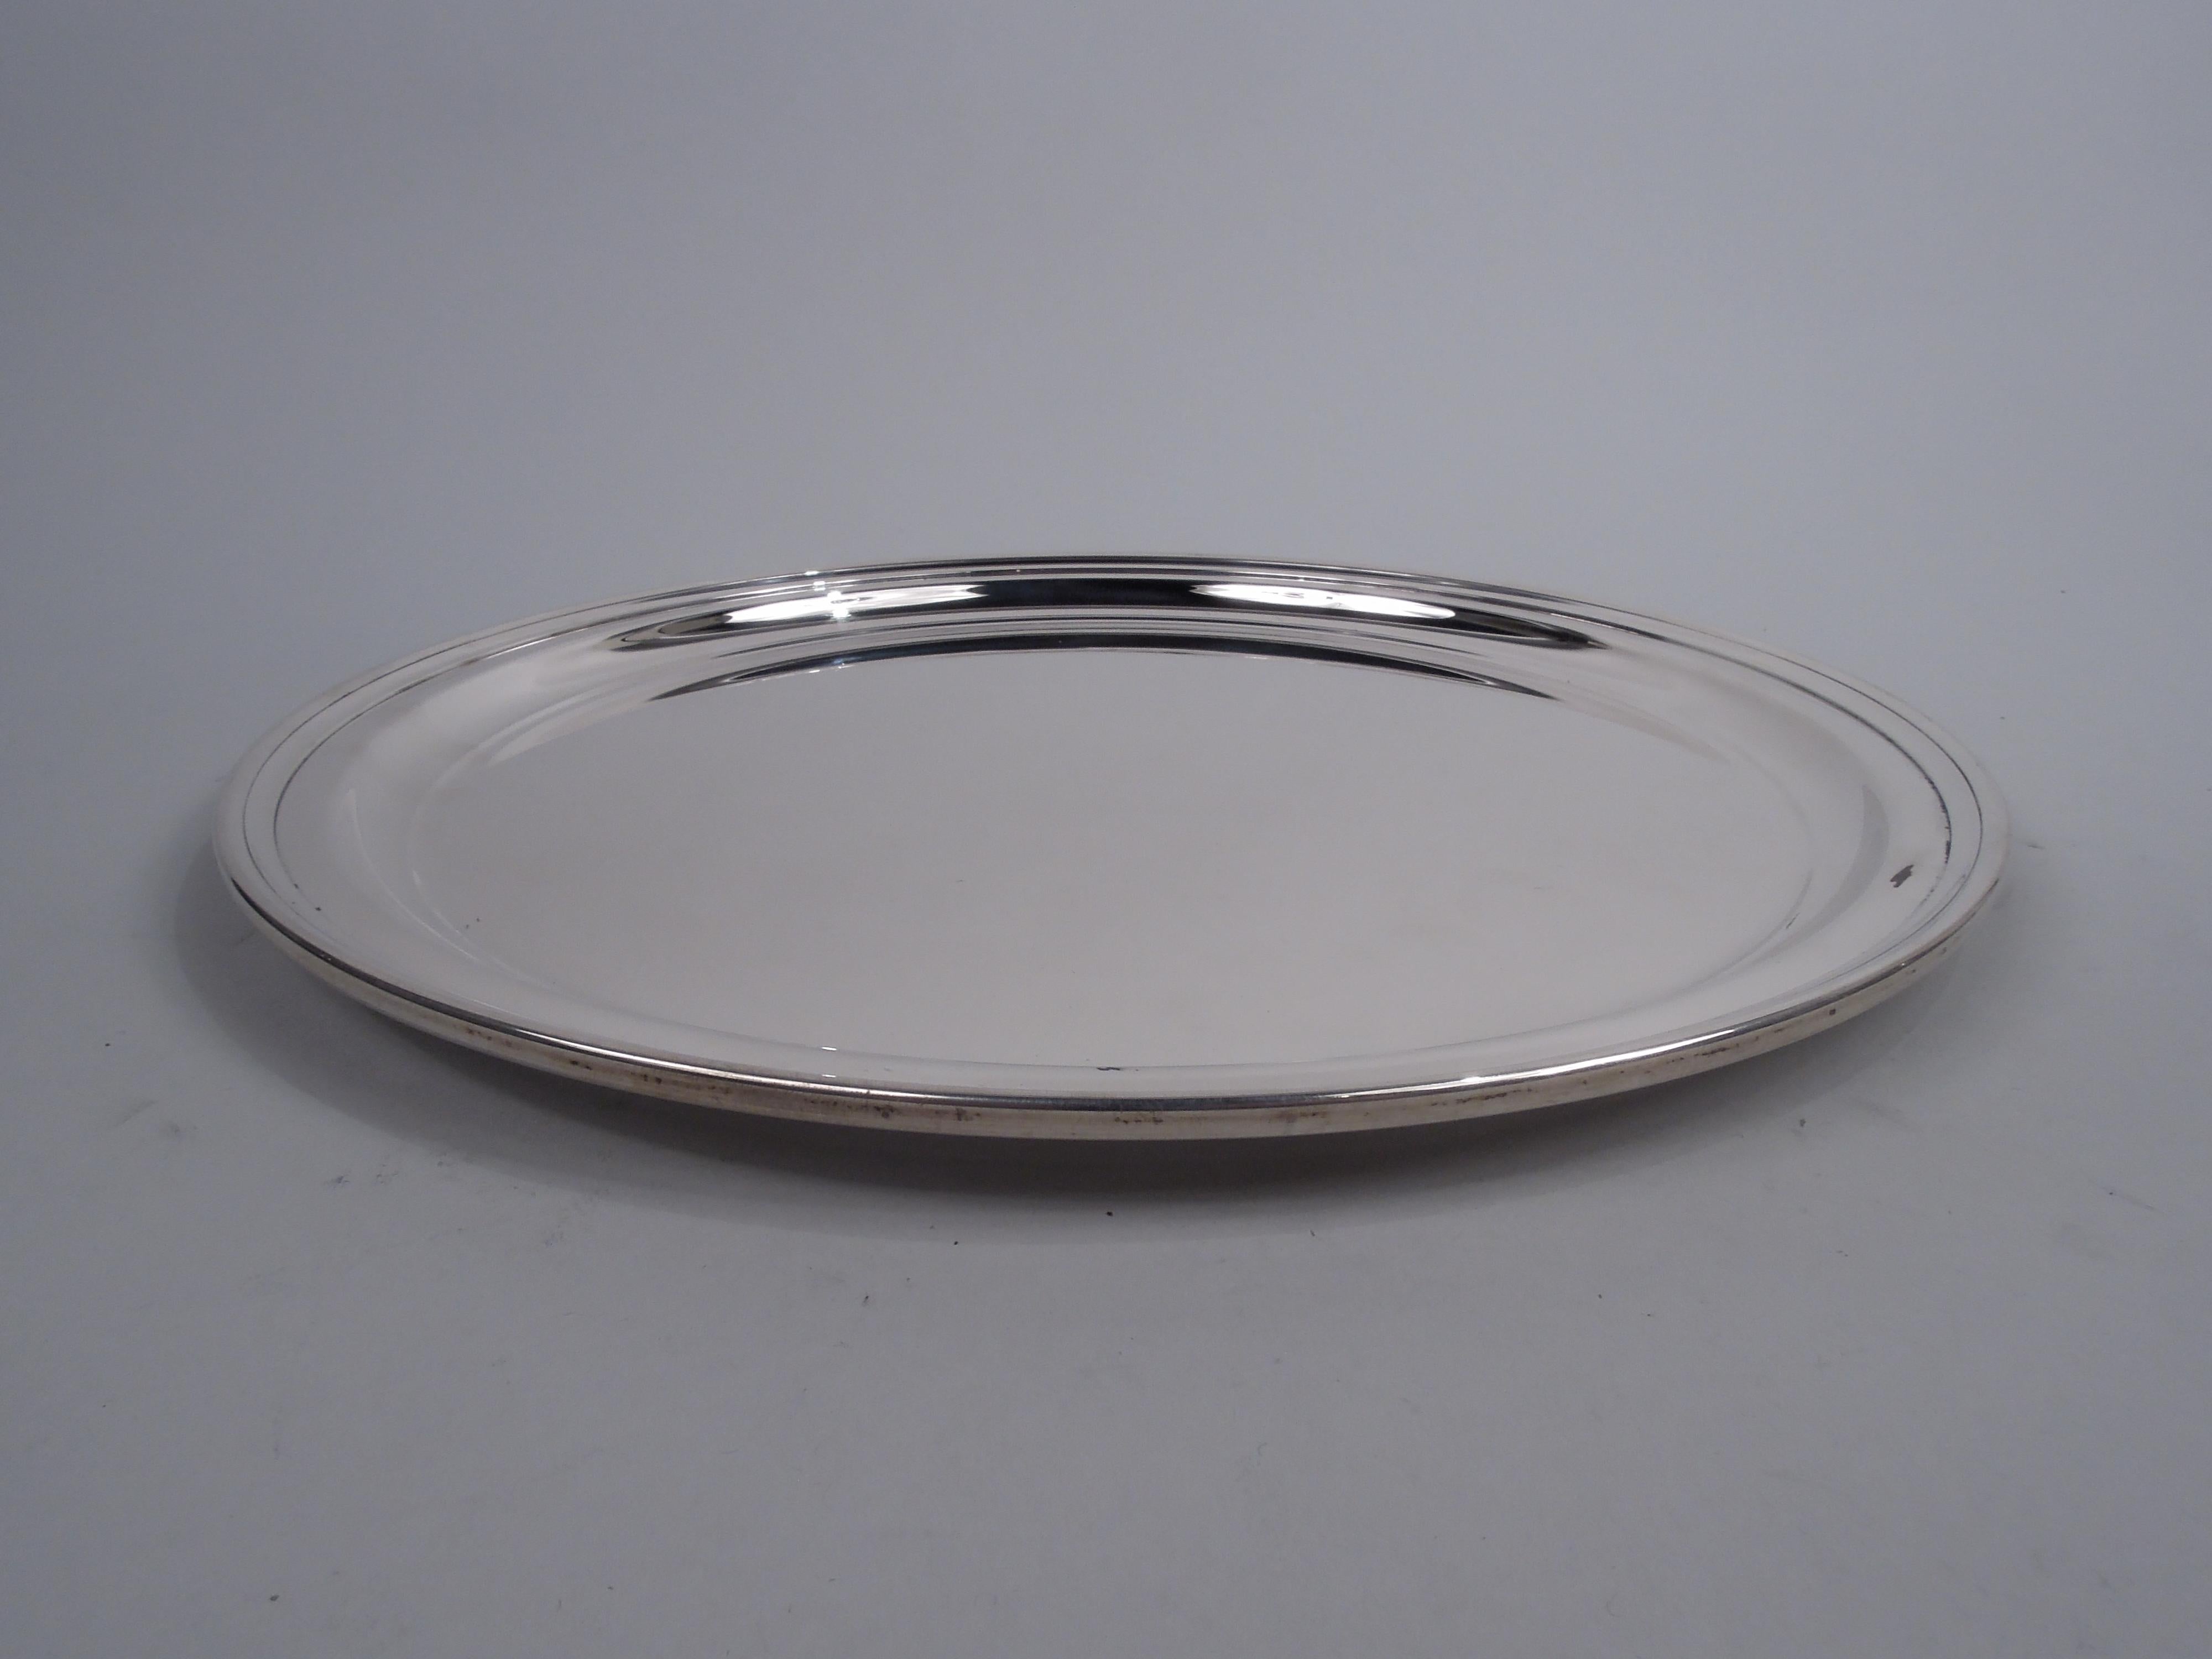 Classic Modern sterling silver serving tray. Made by Tiffany & Co. in New York, ca 1960. Round well, narrow shoulder, and plain rim with incised band. Heavy and well balanced. Fully marked including maker’s stamp and pattern no. 21153. Weight: 27